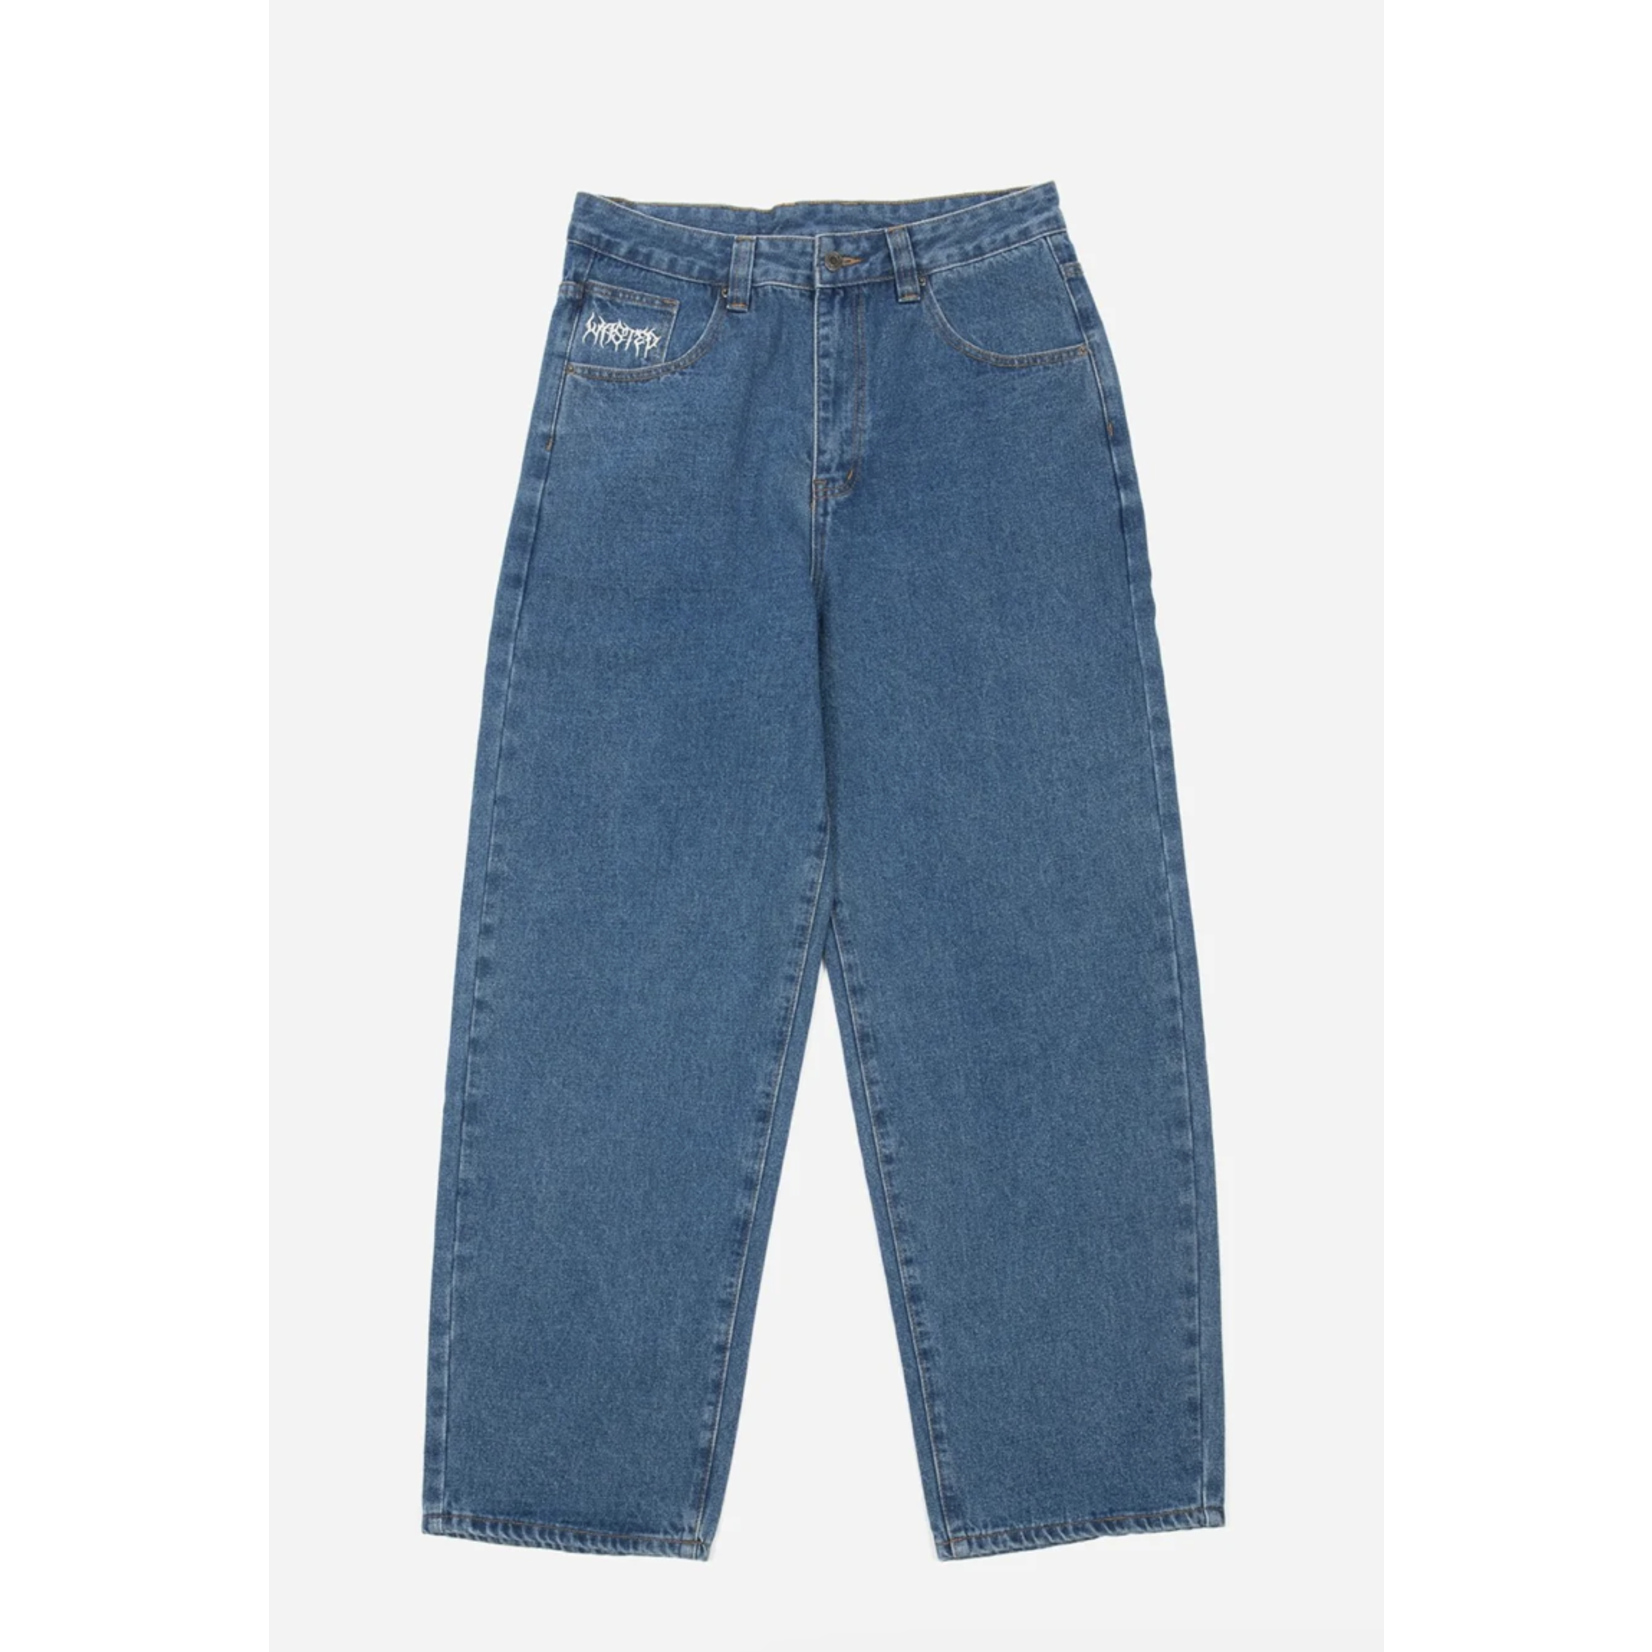 WASTED PARIS Wasted Paris - Casper Feeler Pant - Washed Blue